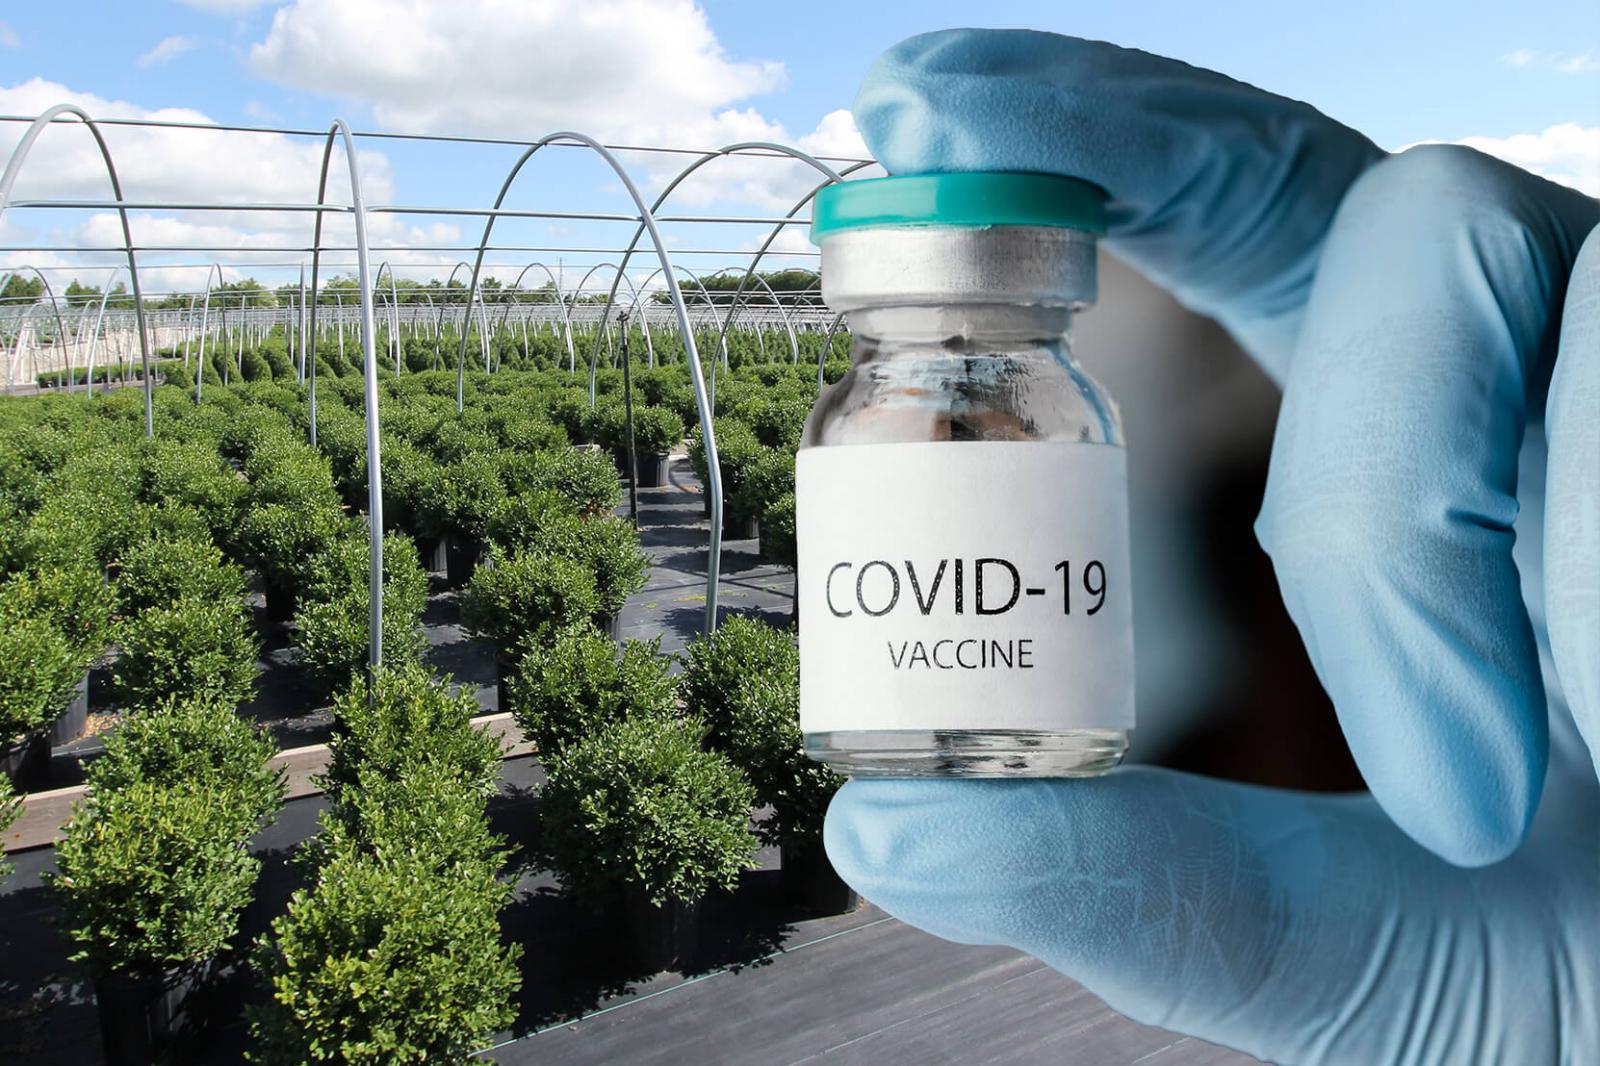 Covid vaccinations for Temporary Foreign Workers — Employer info session